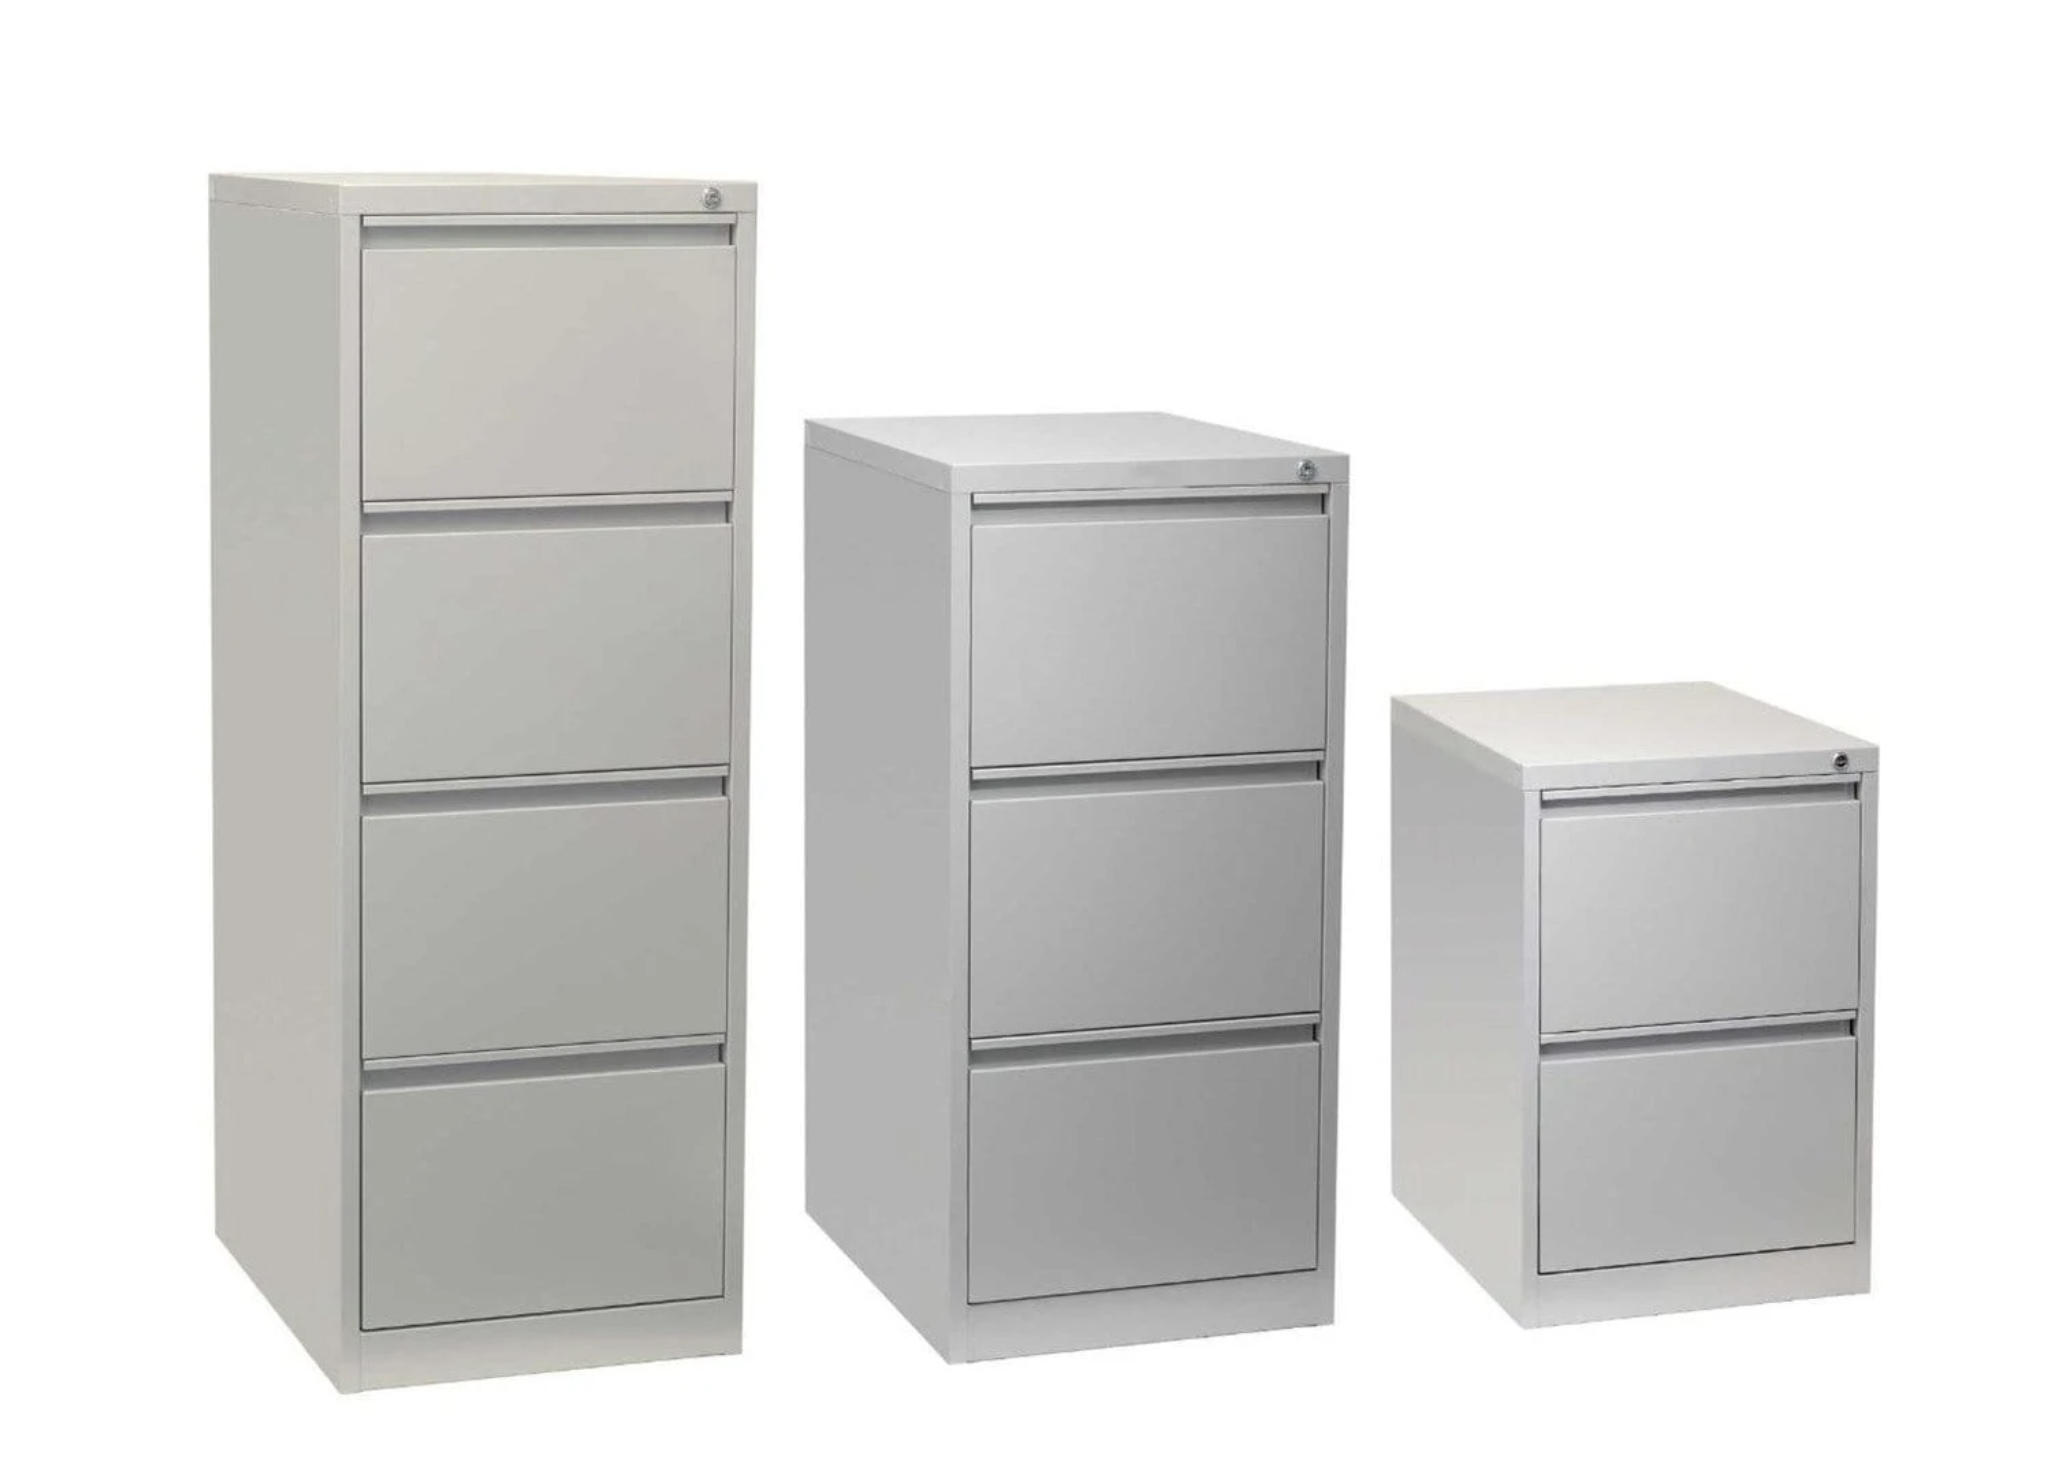 How to Choose the Best Filing Cabinet